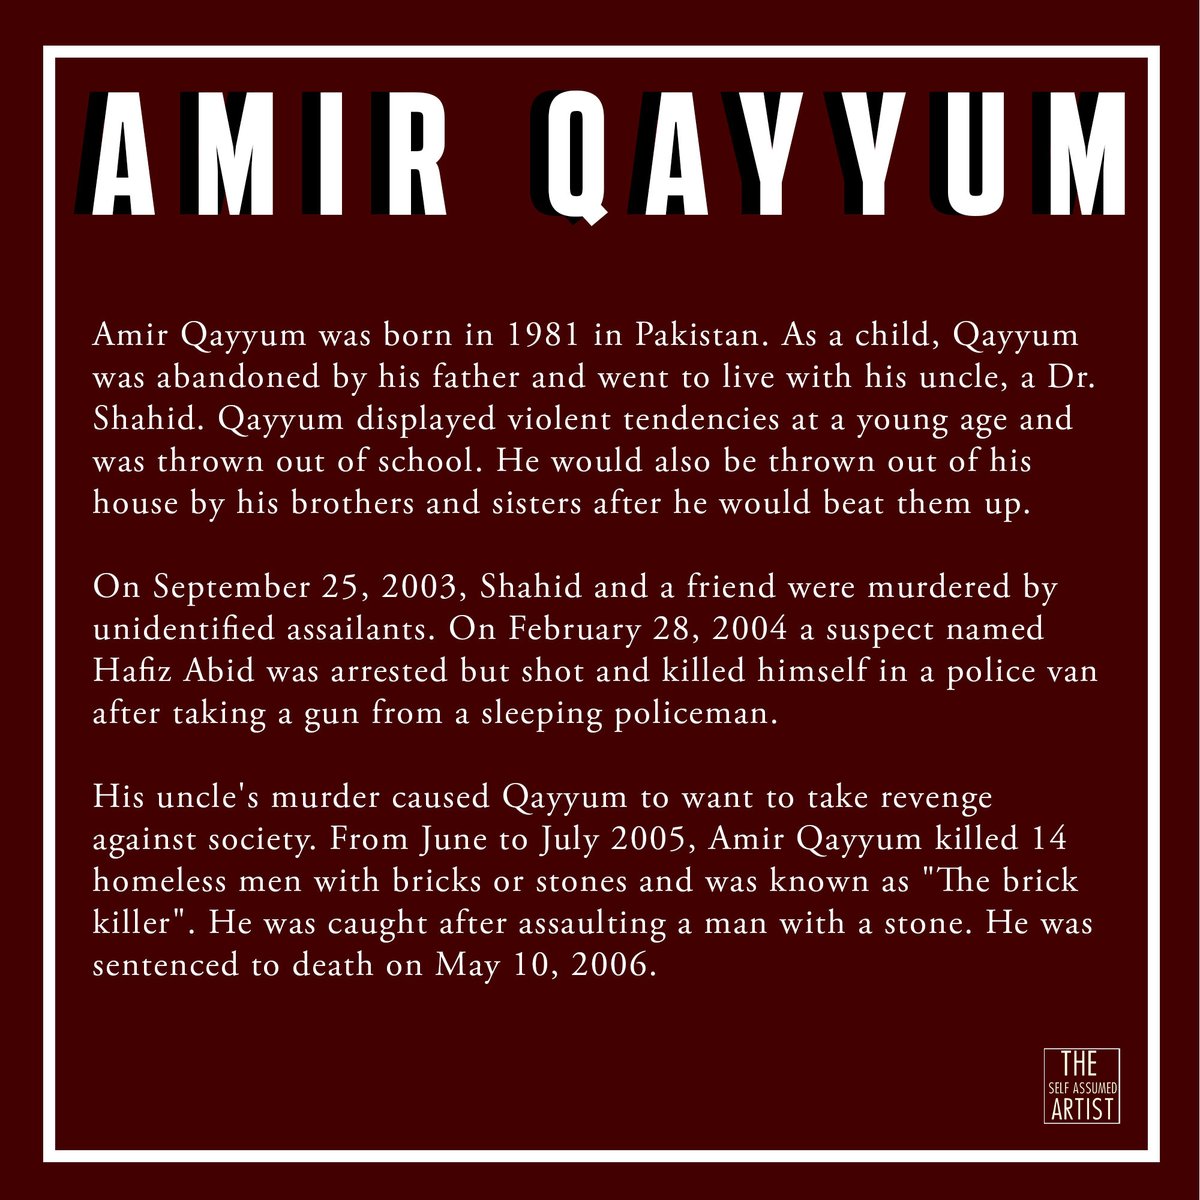 Amir Qayyum, also known as The Brick Killer, was a Pakistani serial killer who killed 14 homeless men in Lahore, Pakistan.